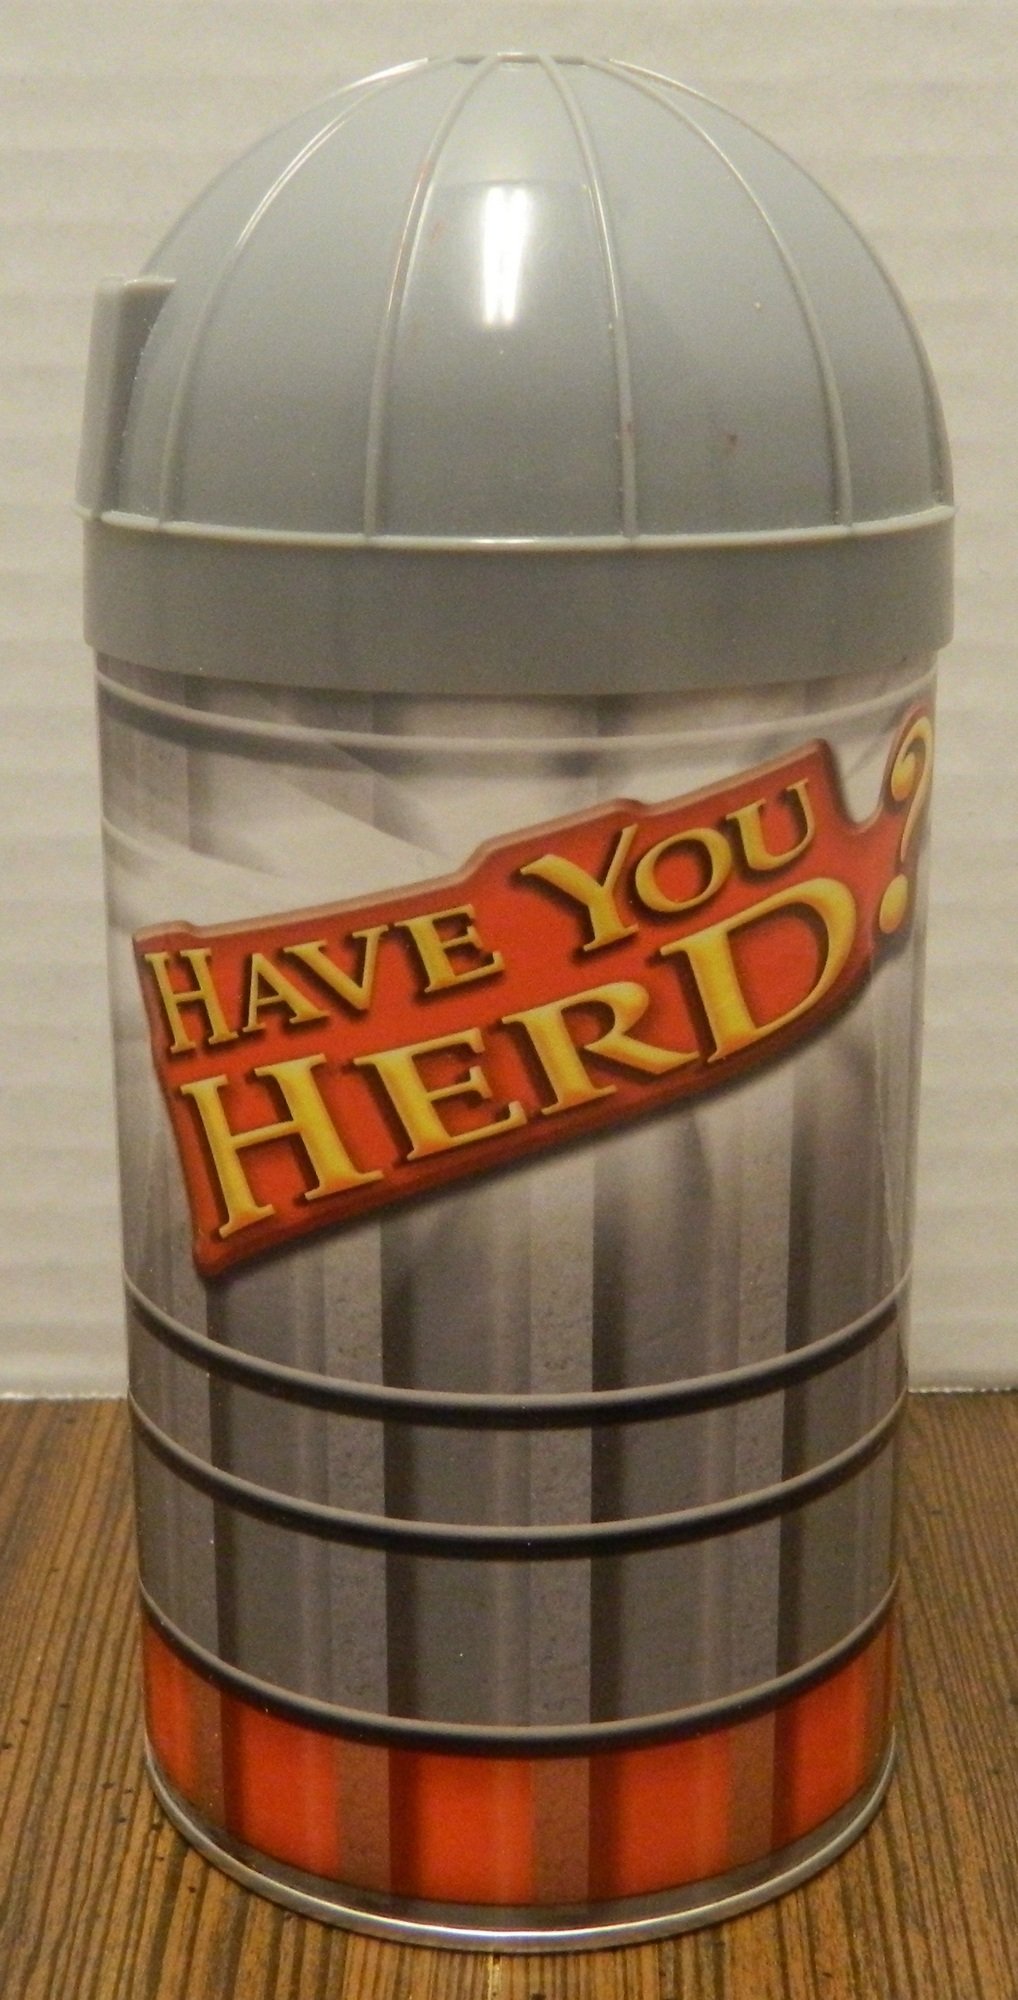 Have You Herd? Board Game Review